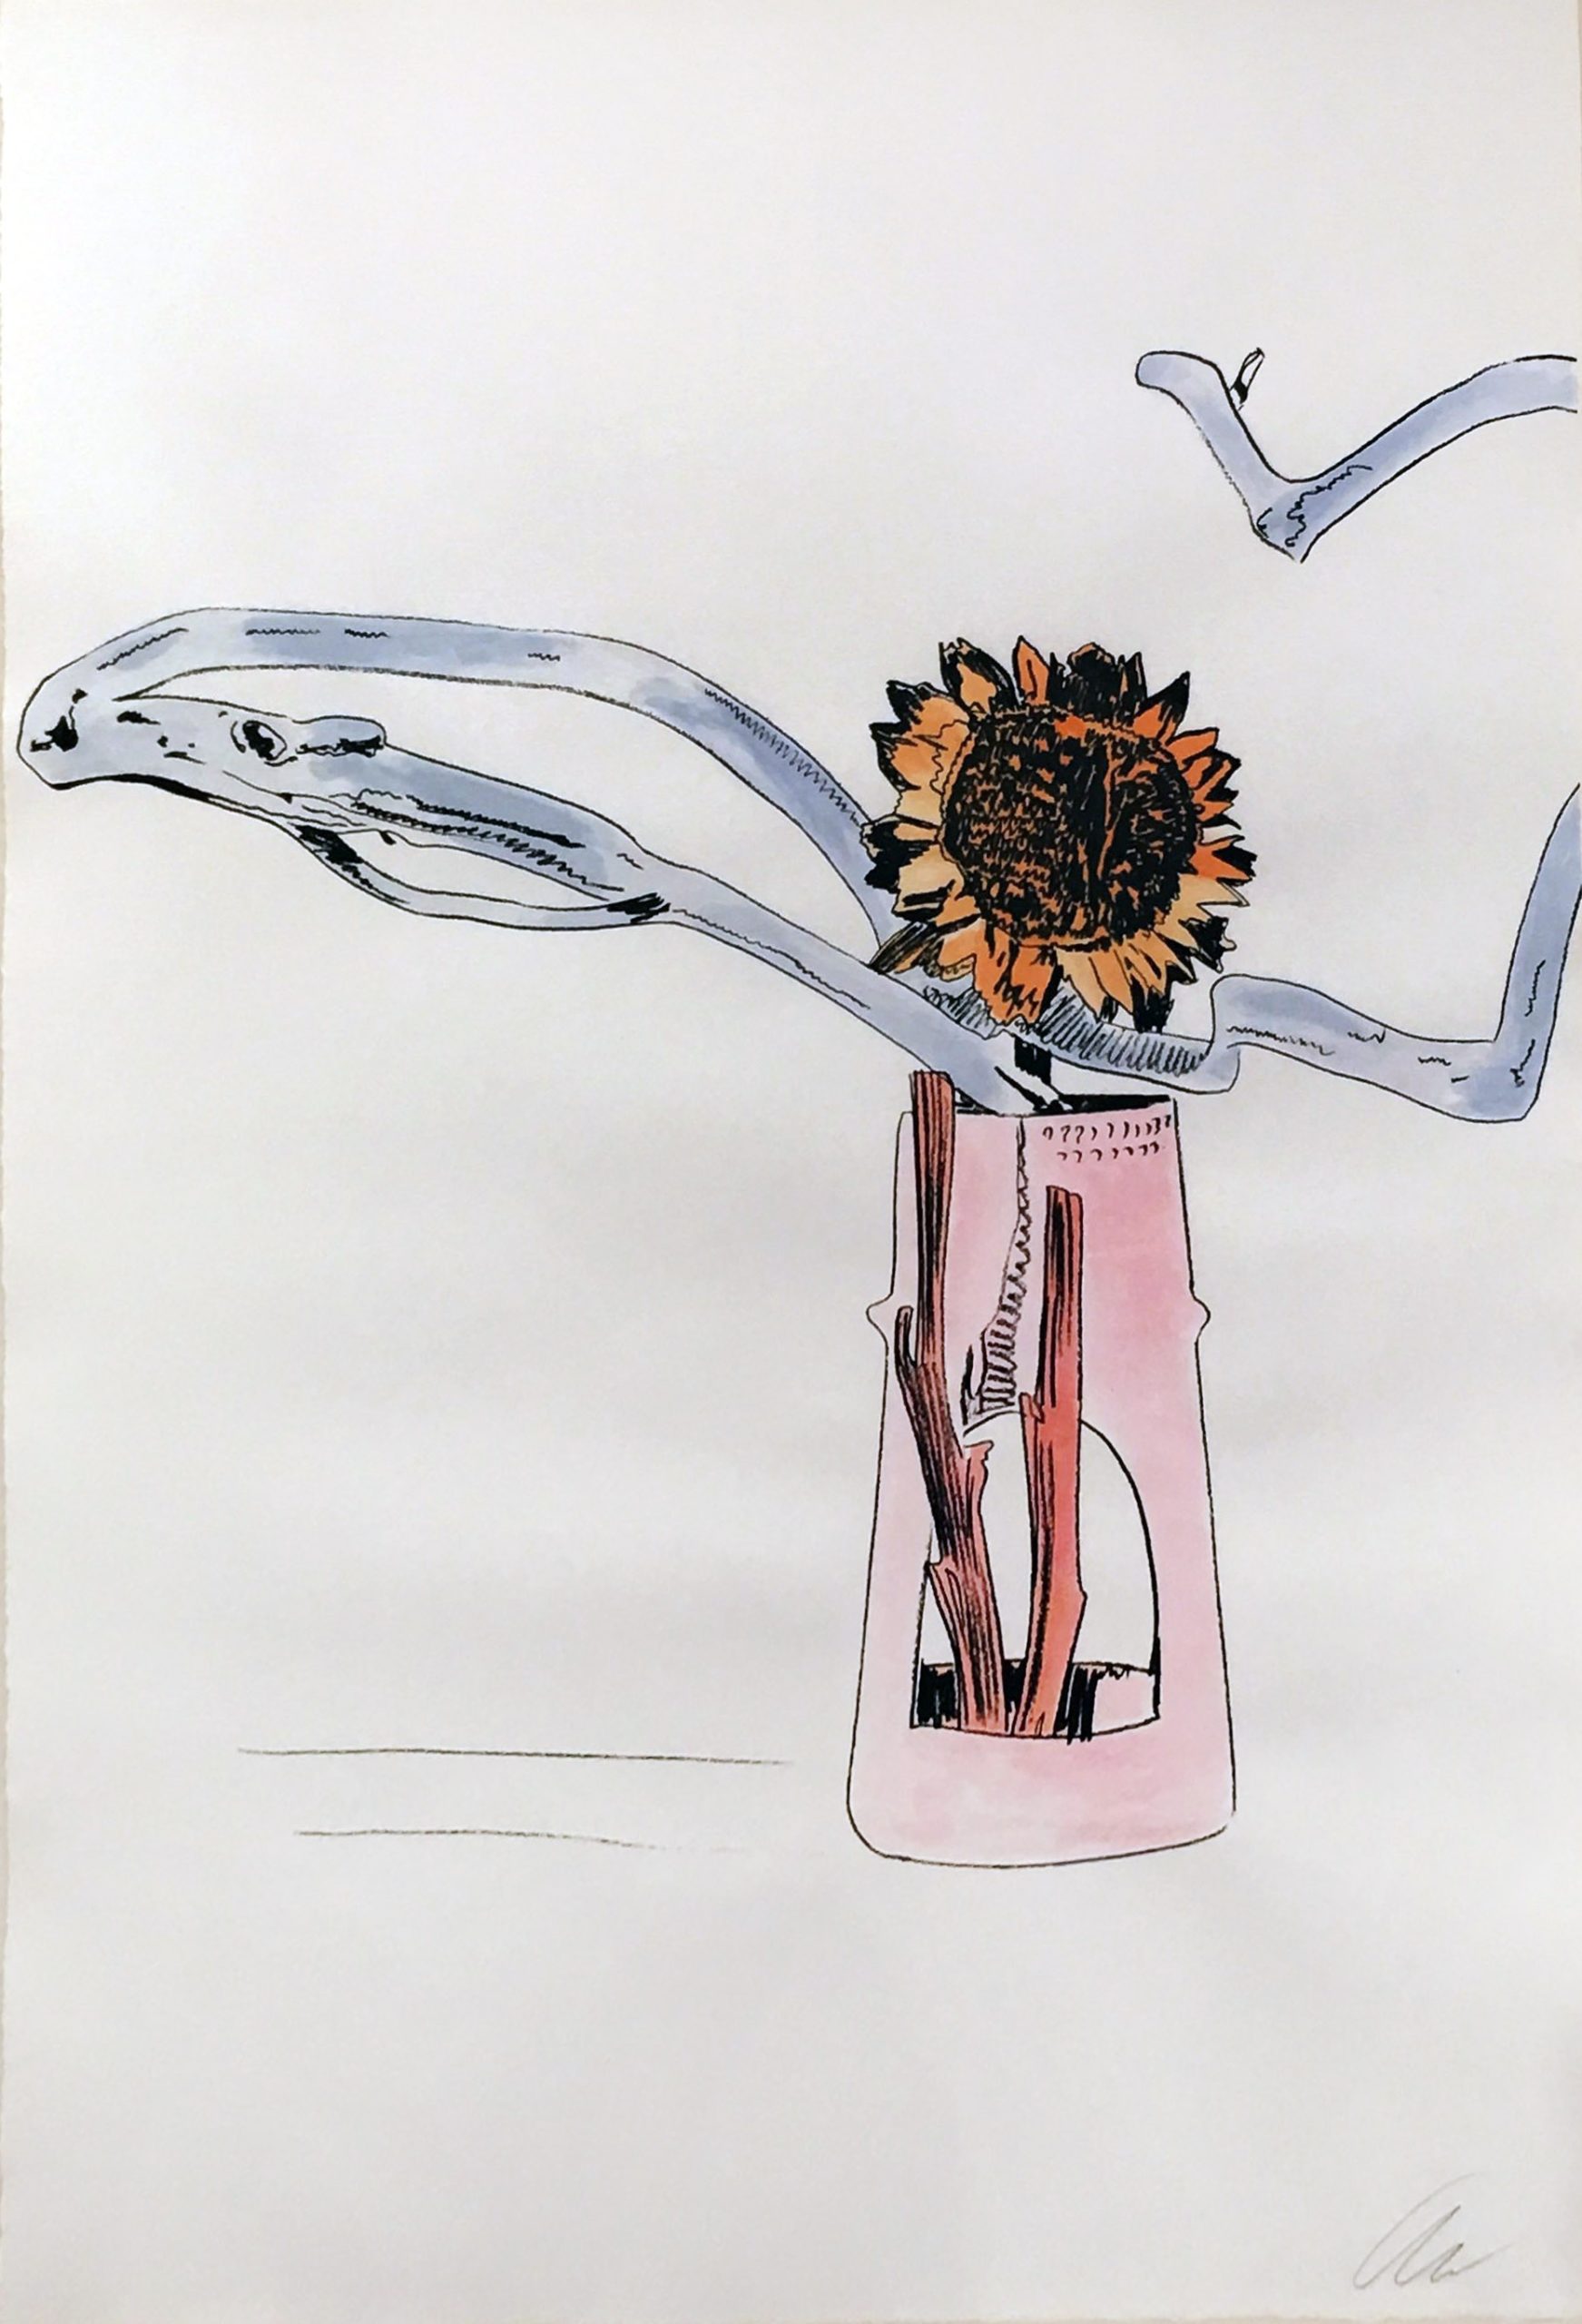 Andy Warhol | Flowers | Hand Colored | 112 | 1974 | Image of Artists' work.